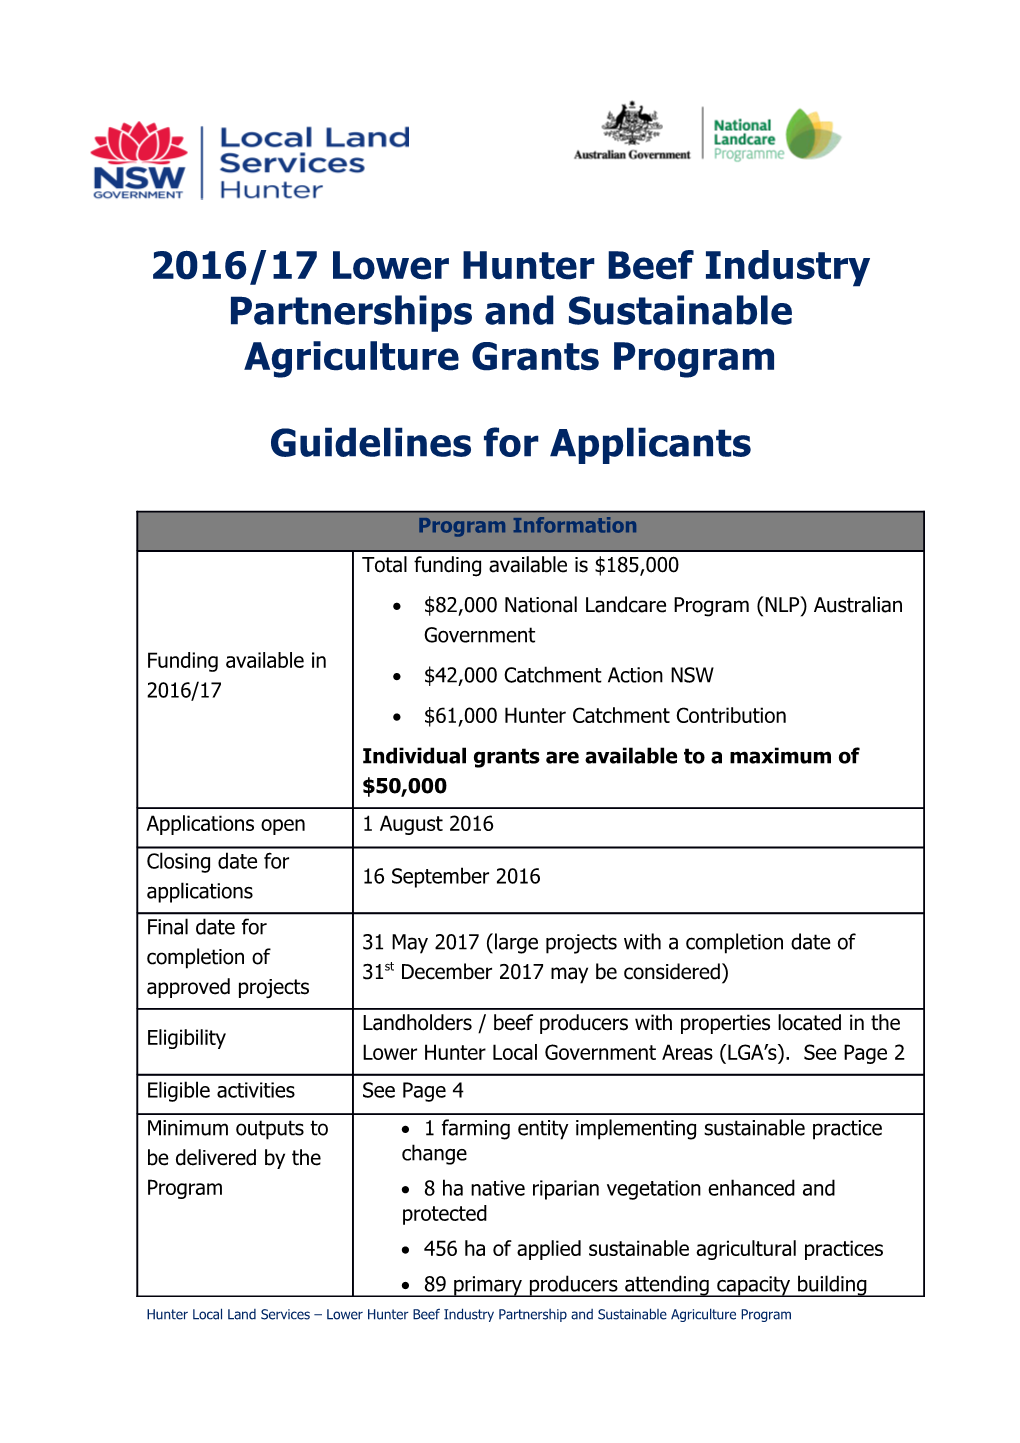 2016/17 Lower Hunter Beef Industry Partnerships and Sustainable Agriculture Grants Program